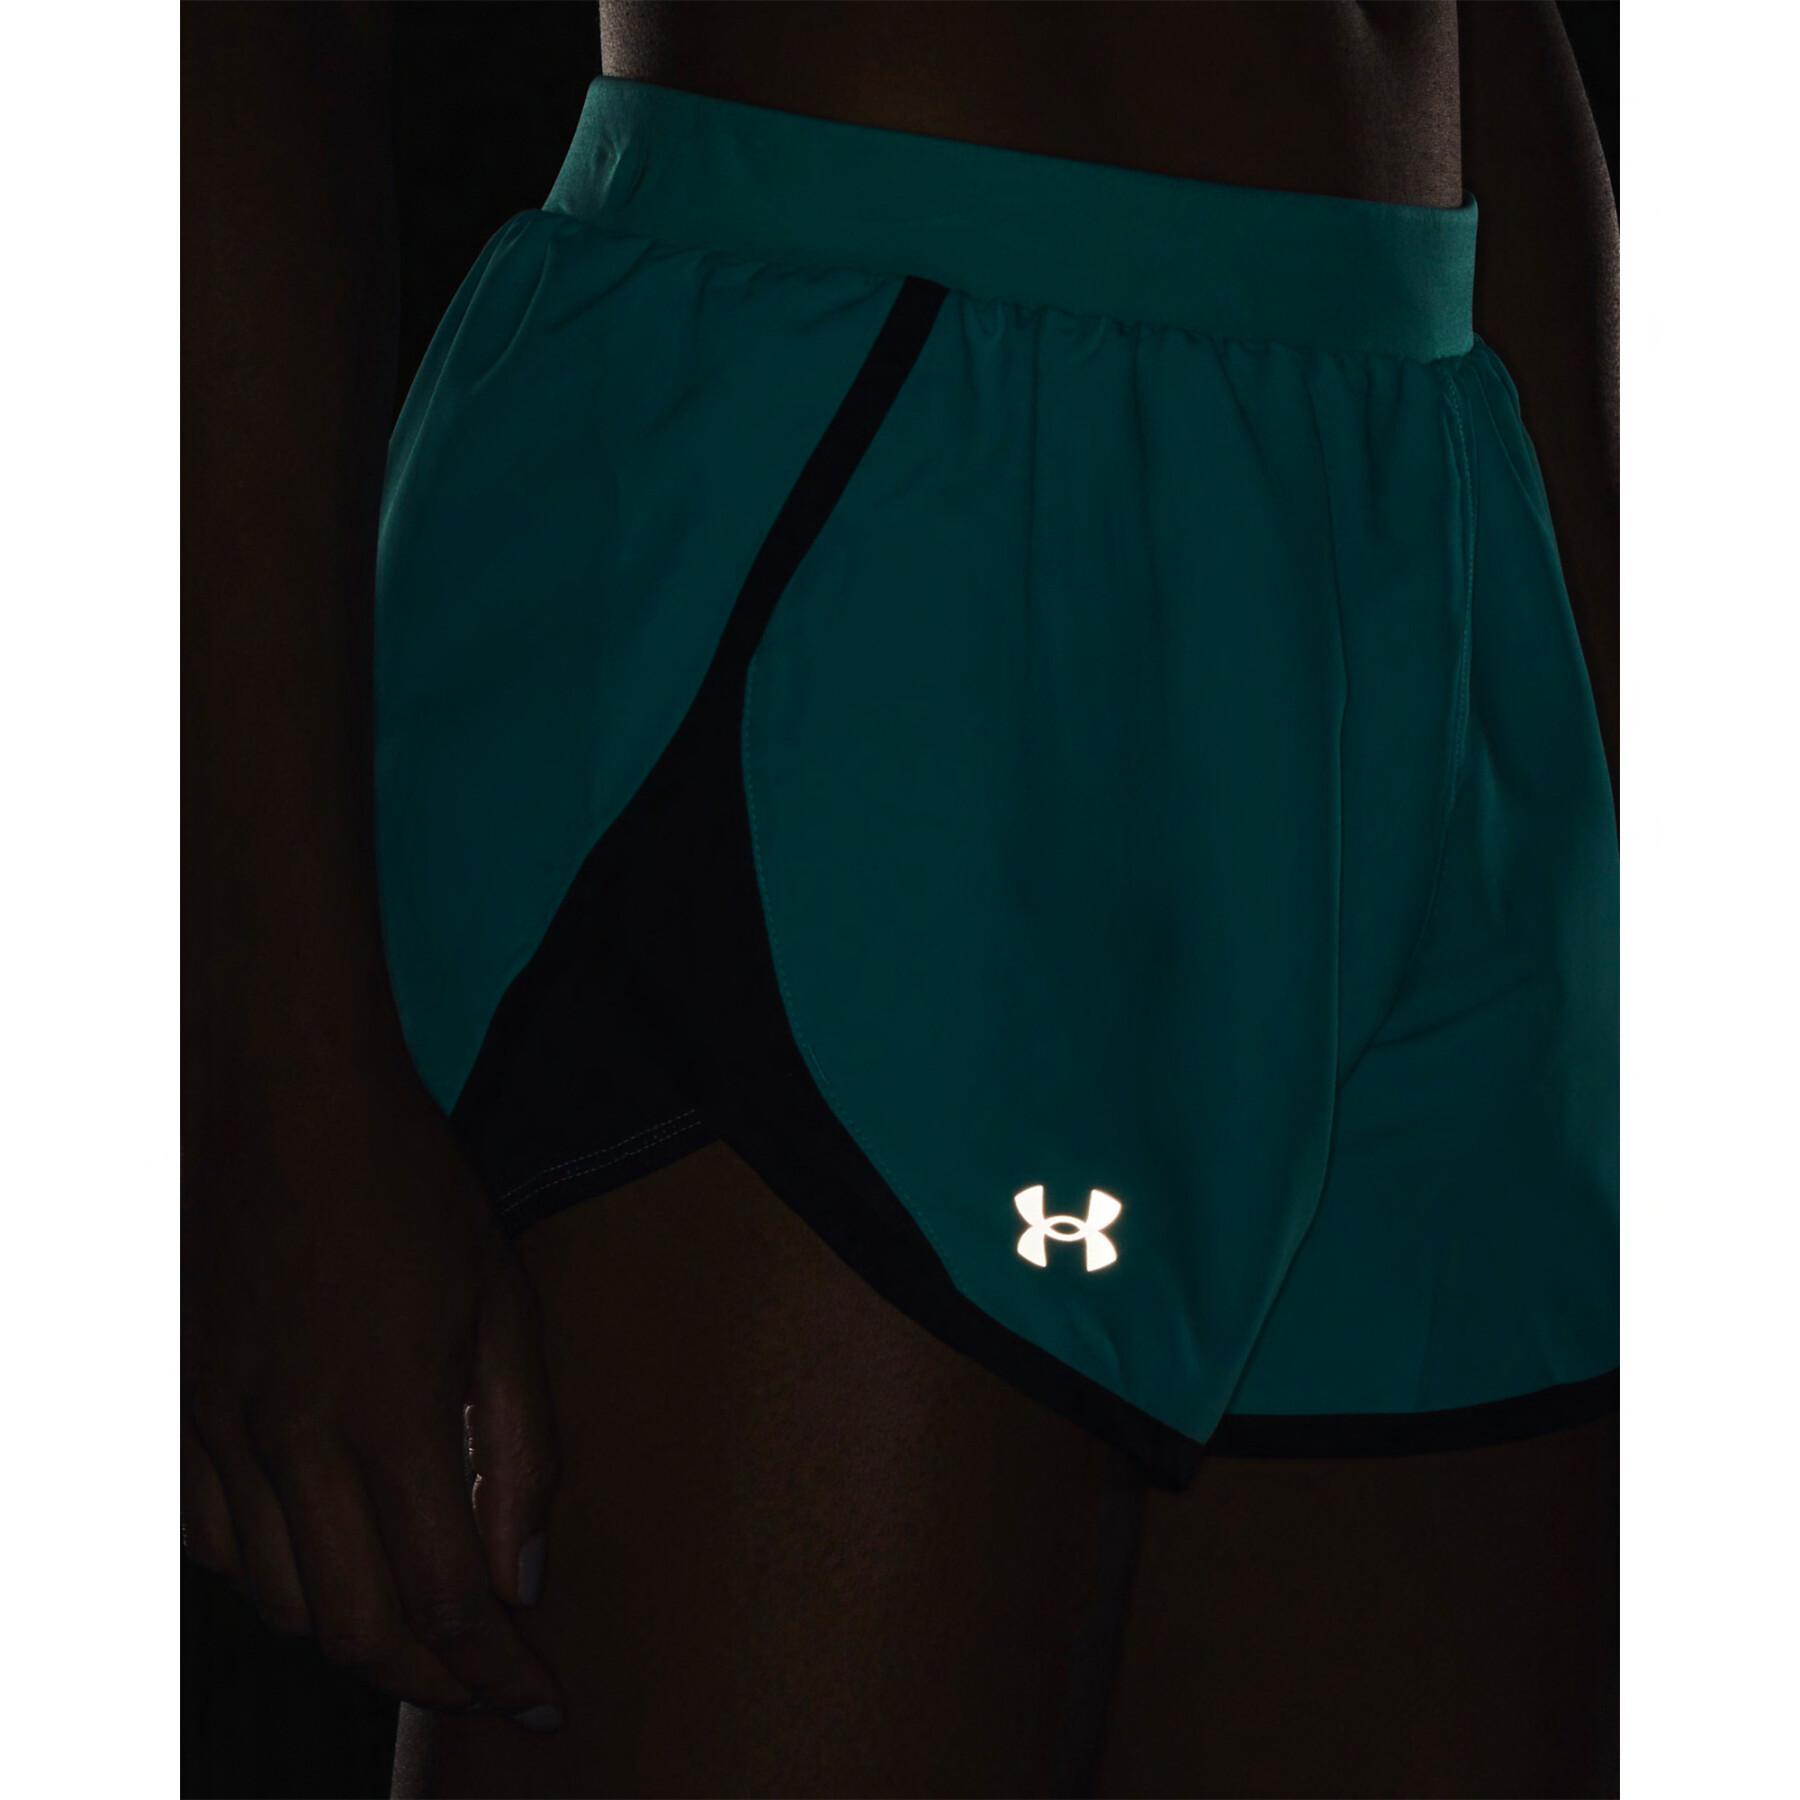 Short femme Under Armour Fly-By 2.0